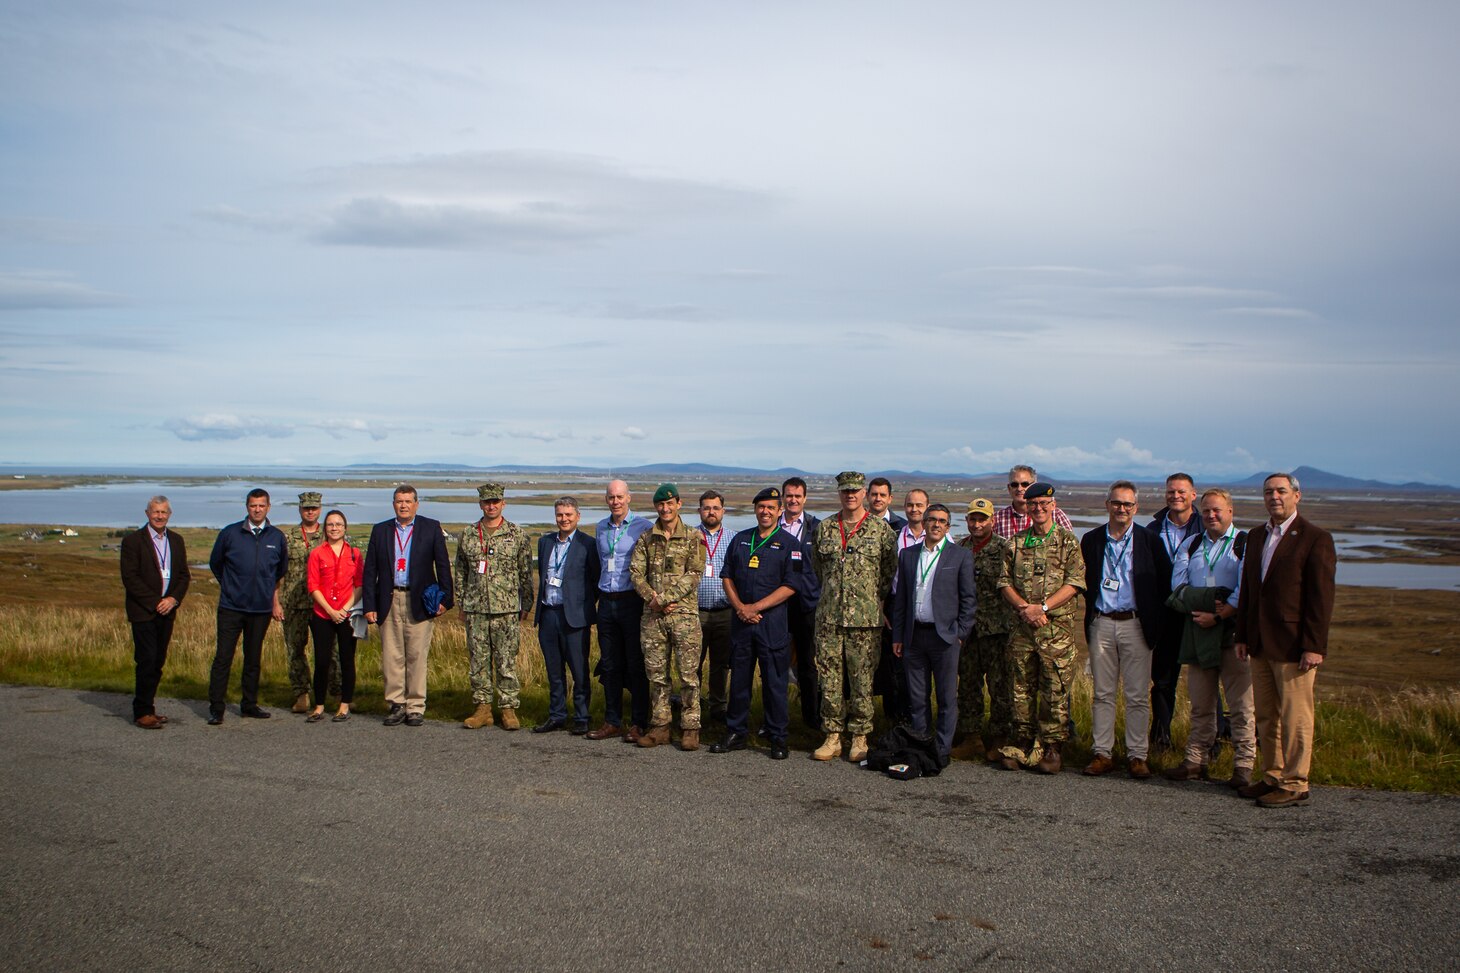 U.S. and U.K. government and military leaders visit the QinetiQ Rangehead facility, Sept. 7, 2022, prior to a demonstration during Exercise Atlantic Thunder 2022 in the Hebrides Islands, Scotland.